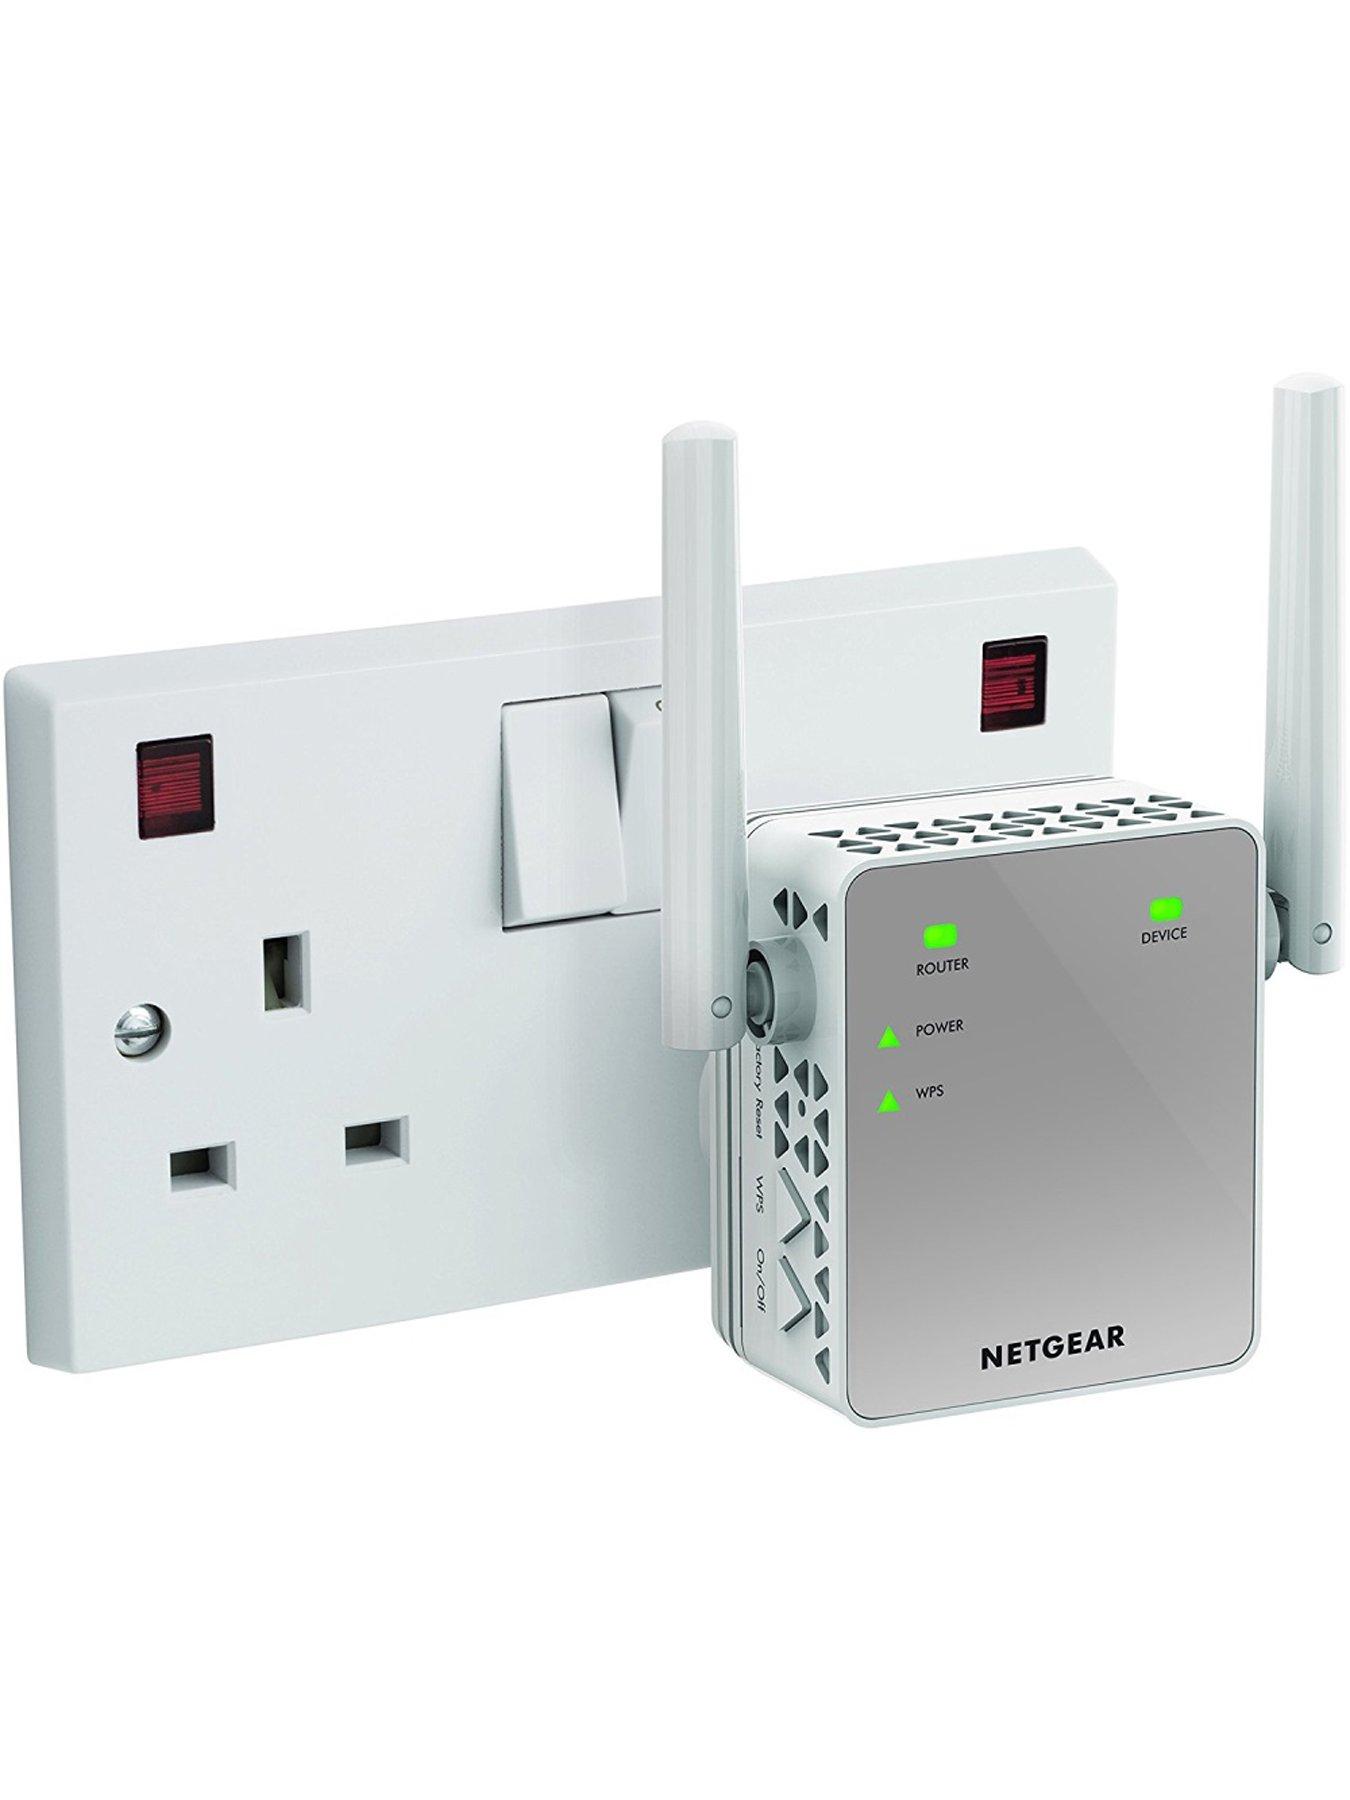 Netgear Wi-Fi Booster Range Extender EX3700 - Coverage Up-to sq ft and 15 Devices with AC750 Dual Band Wireless Signal | Very Ireland